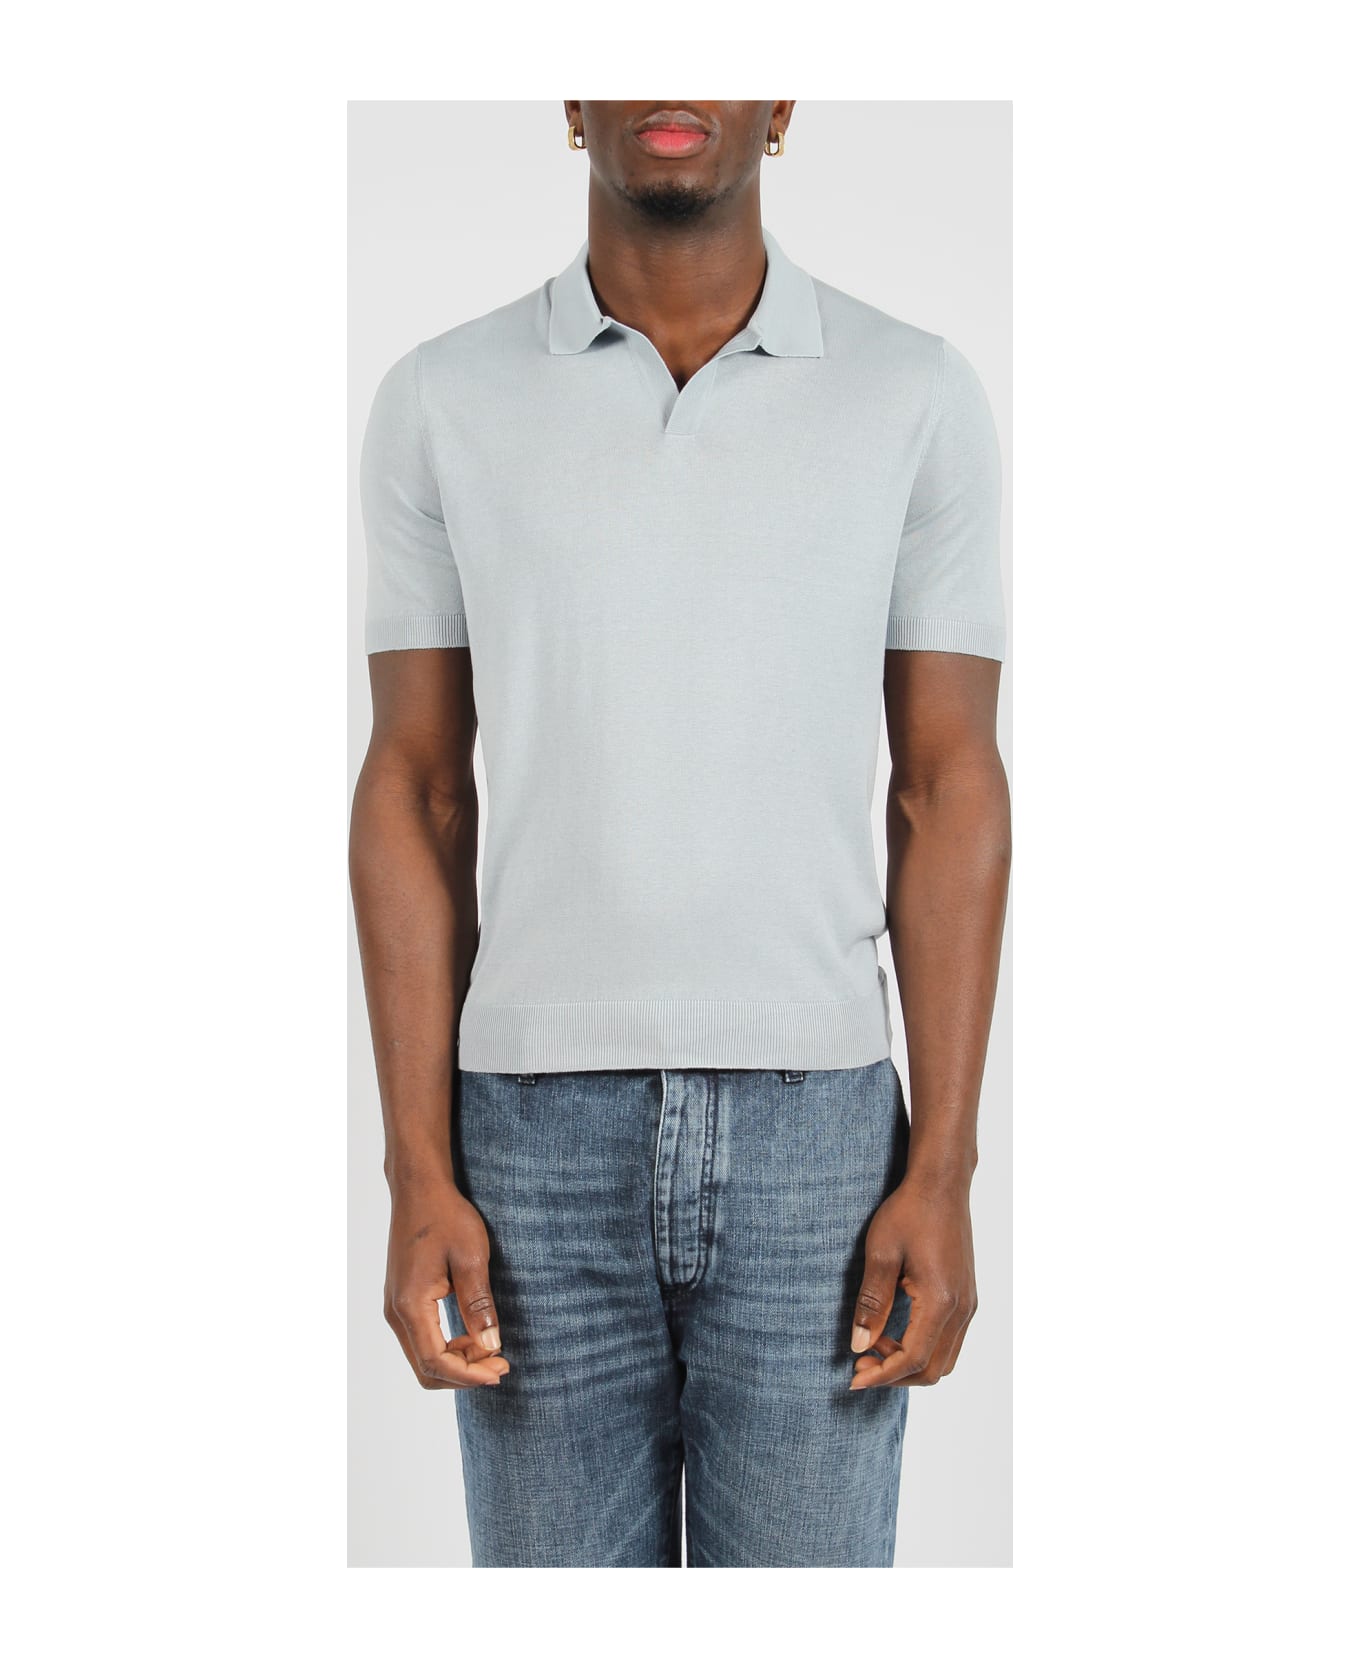 Tagliatore Open Collar Knitted Polo Shirt - Blue